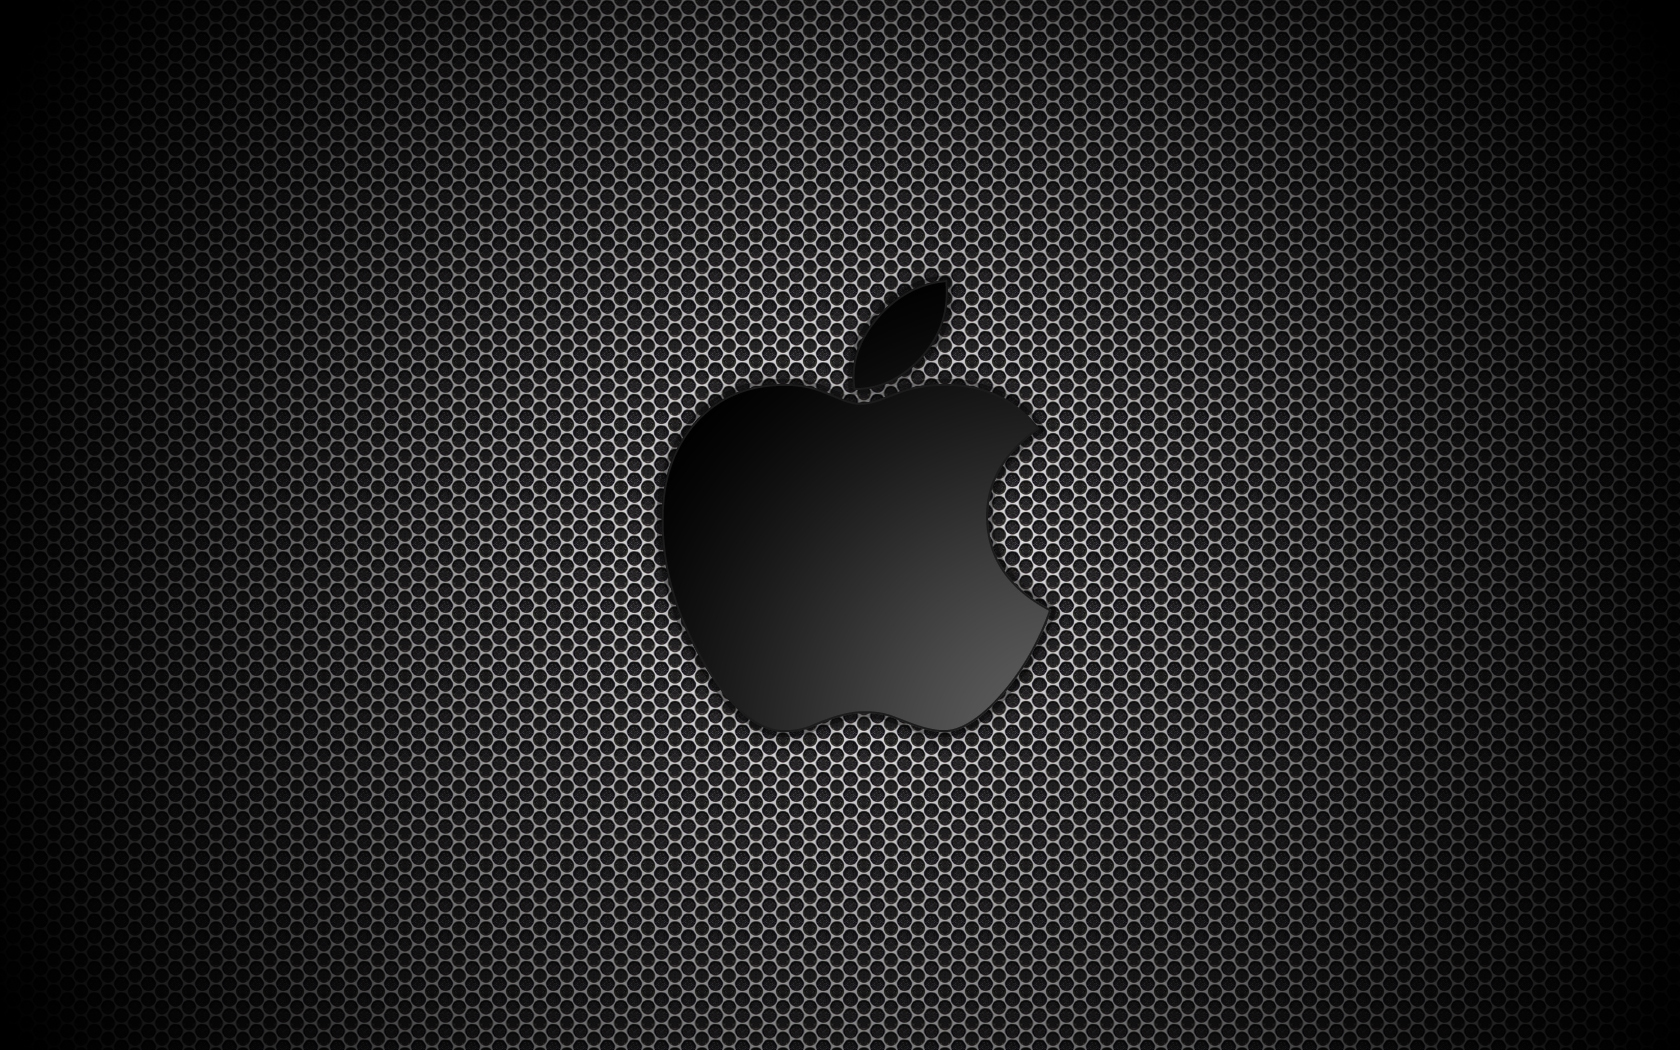 The Colour Black Image Mac Os HD Wallpaper And Background